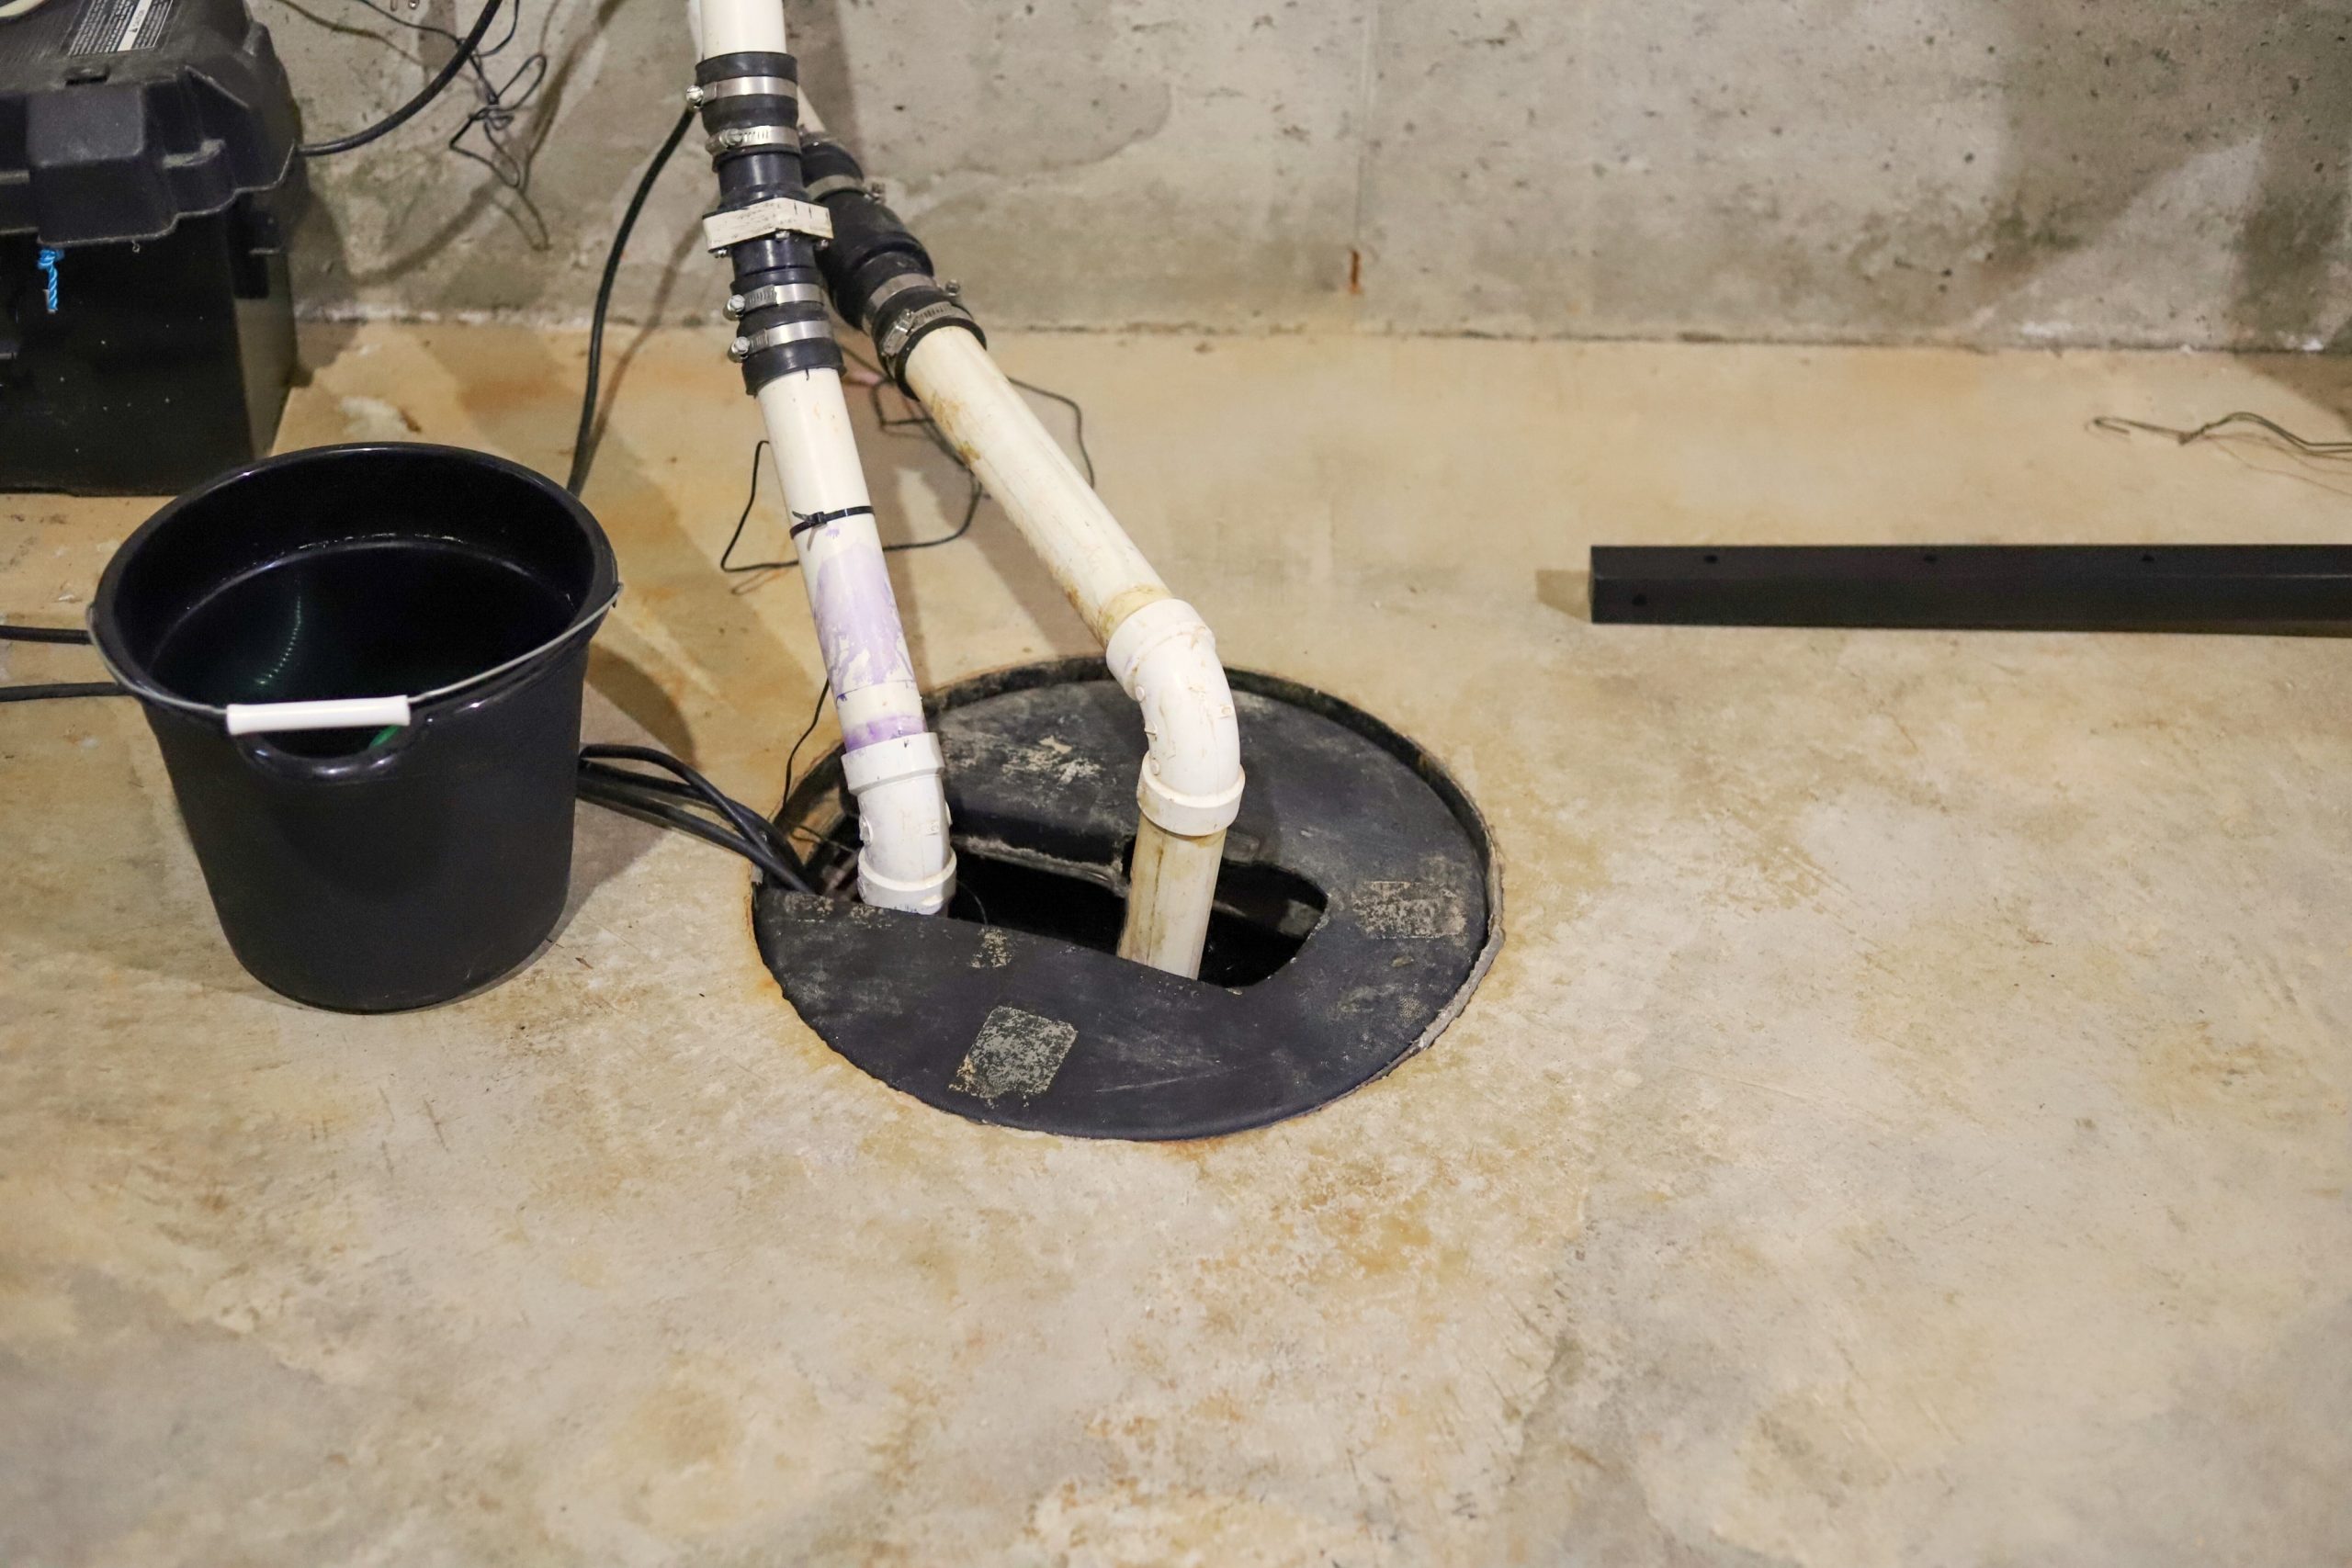 A sump pump in a basement with a bucket next to it